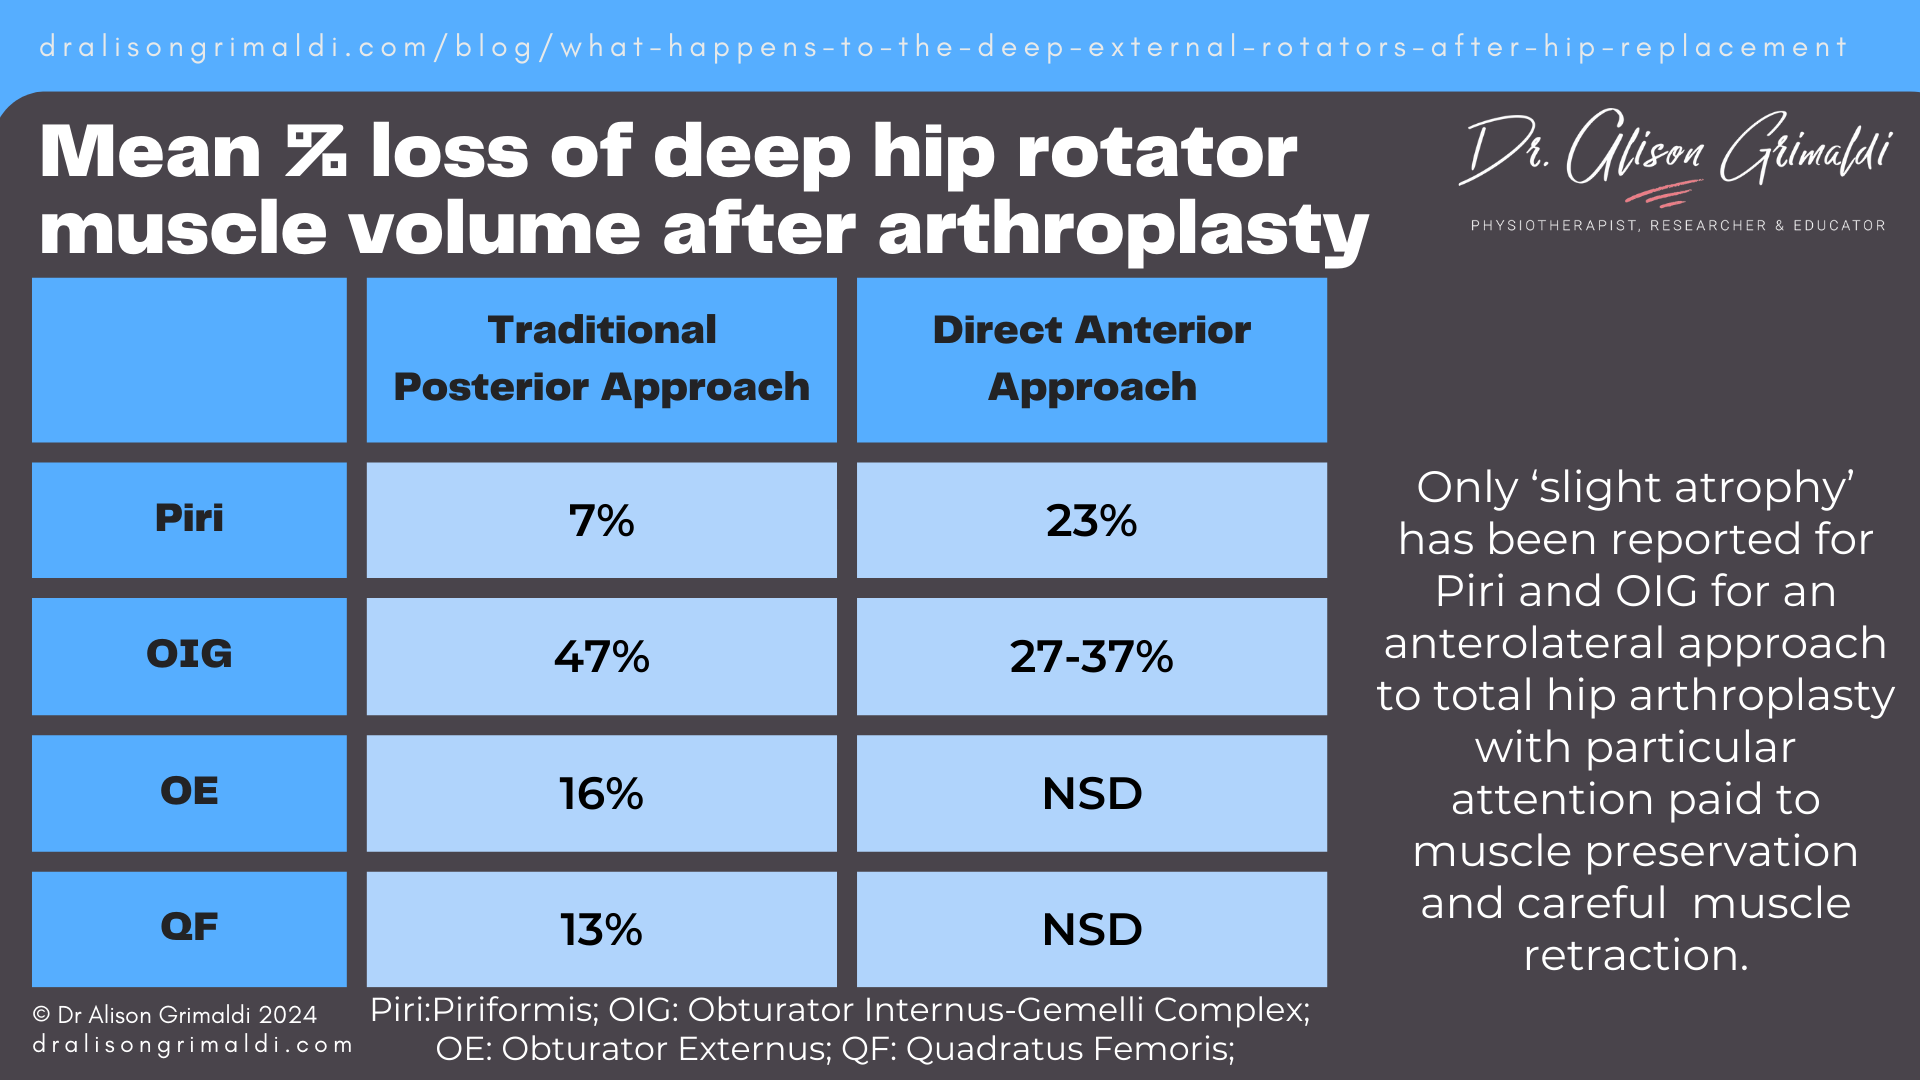 mean-%-loss-of-deep-hip-rotator-muscle-volume-after-arthroplasty